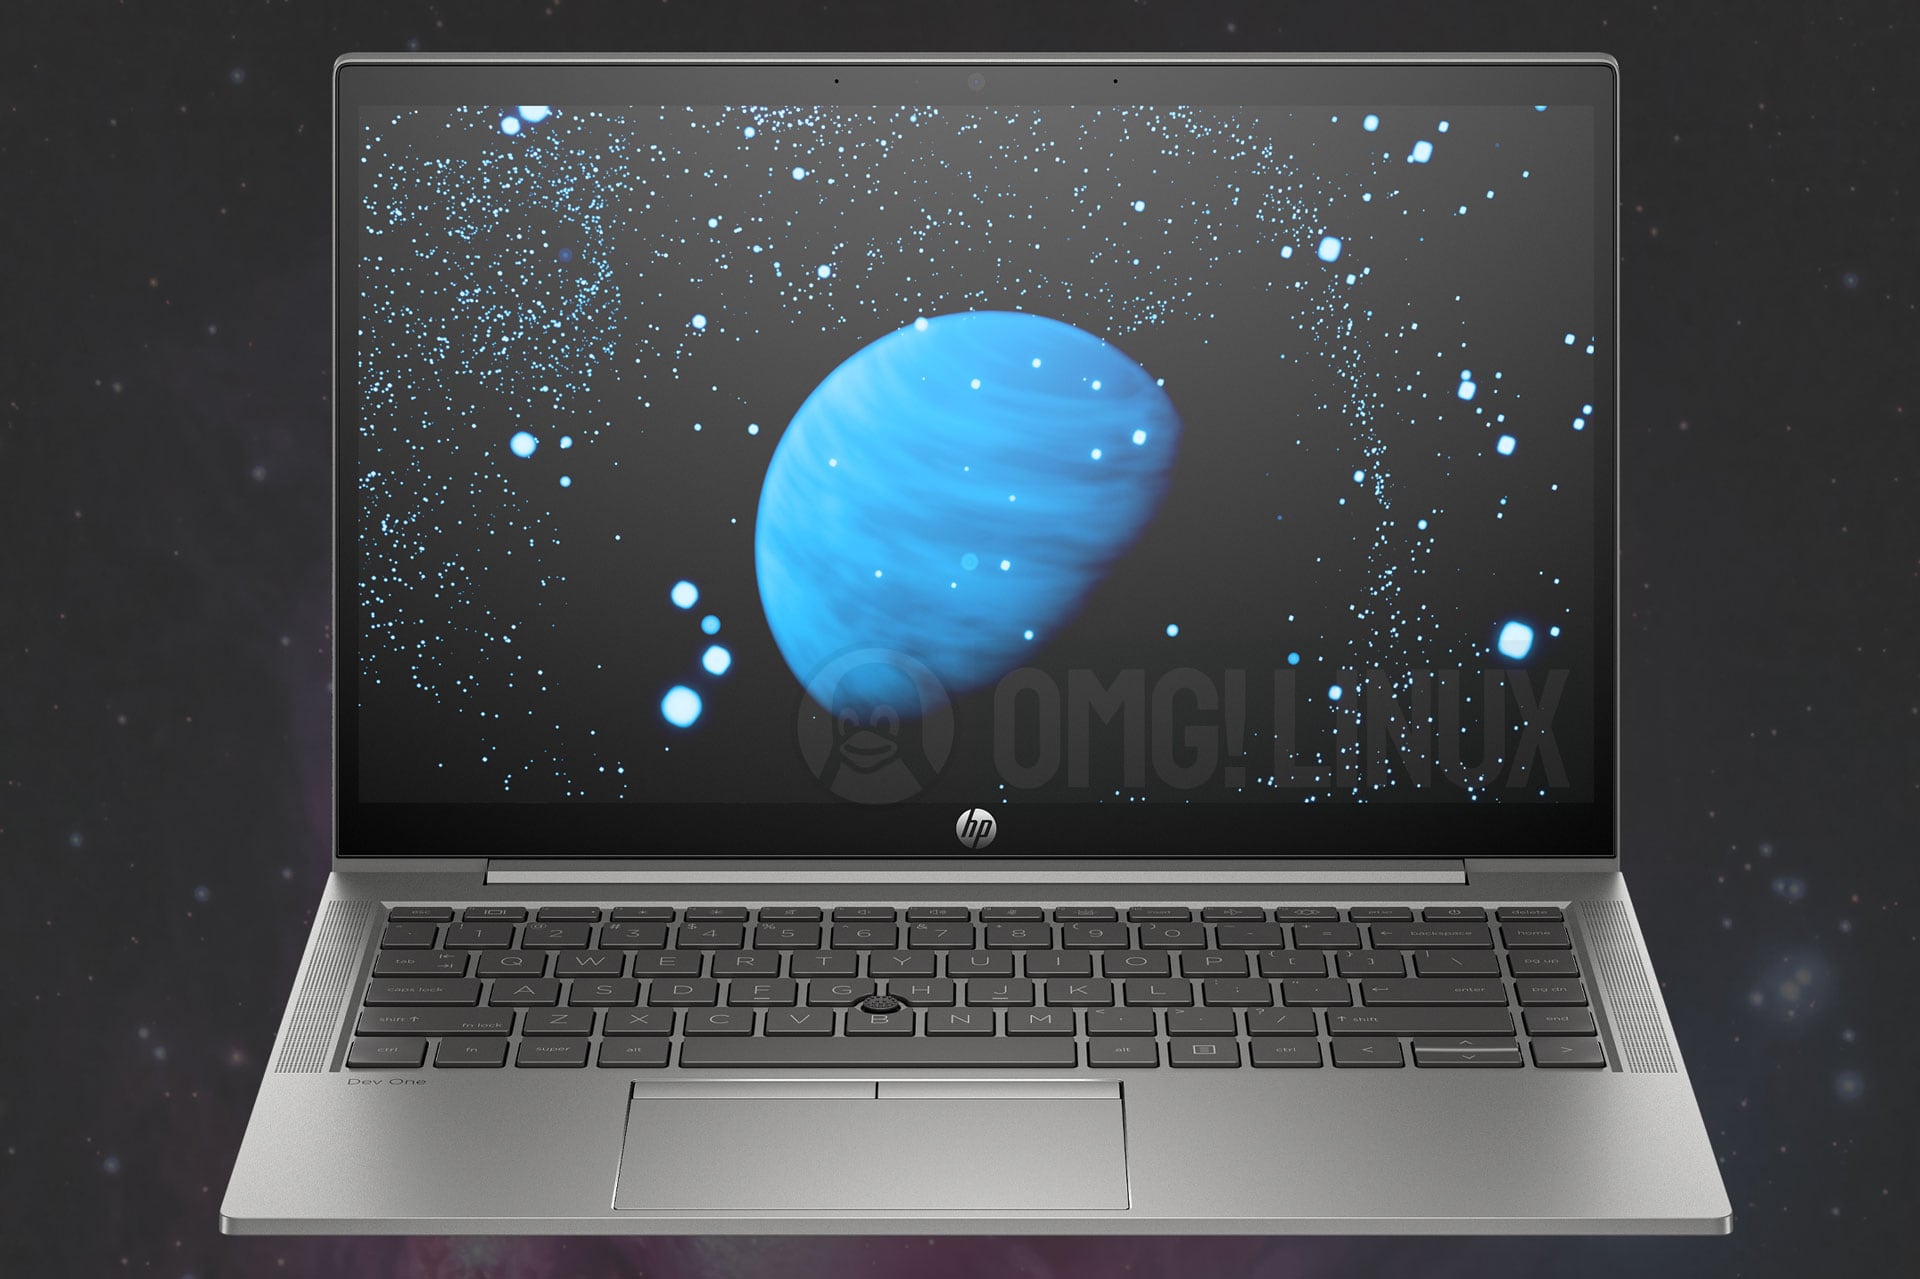 image of the HP Dev One Linux laptop against a space background